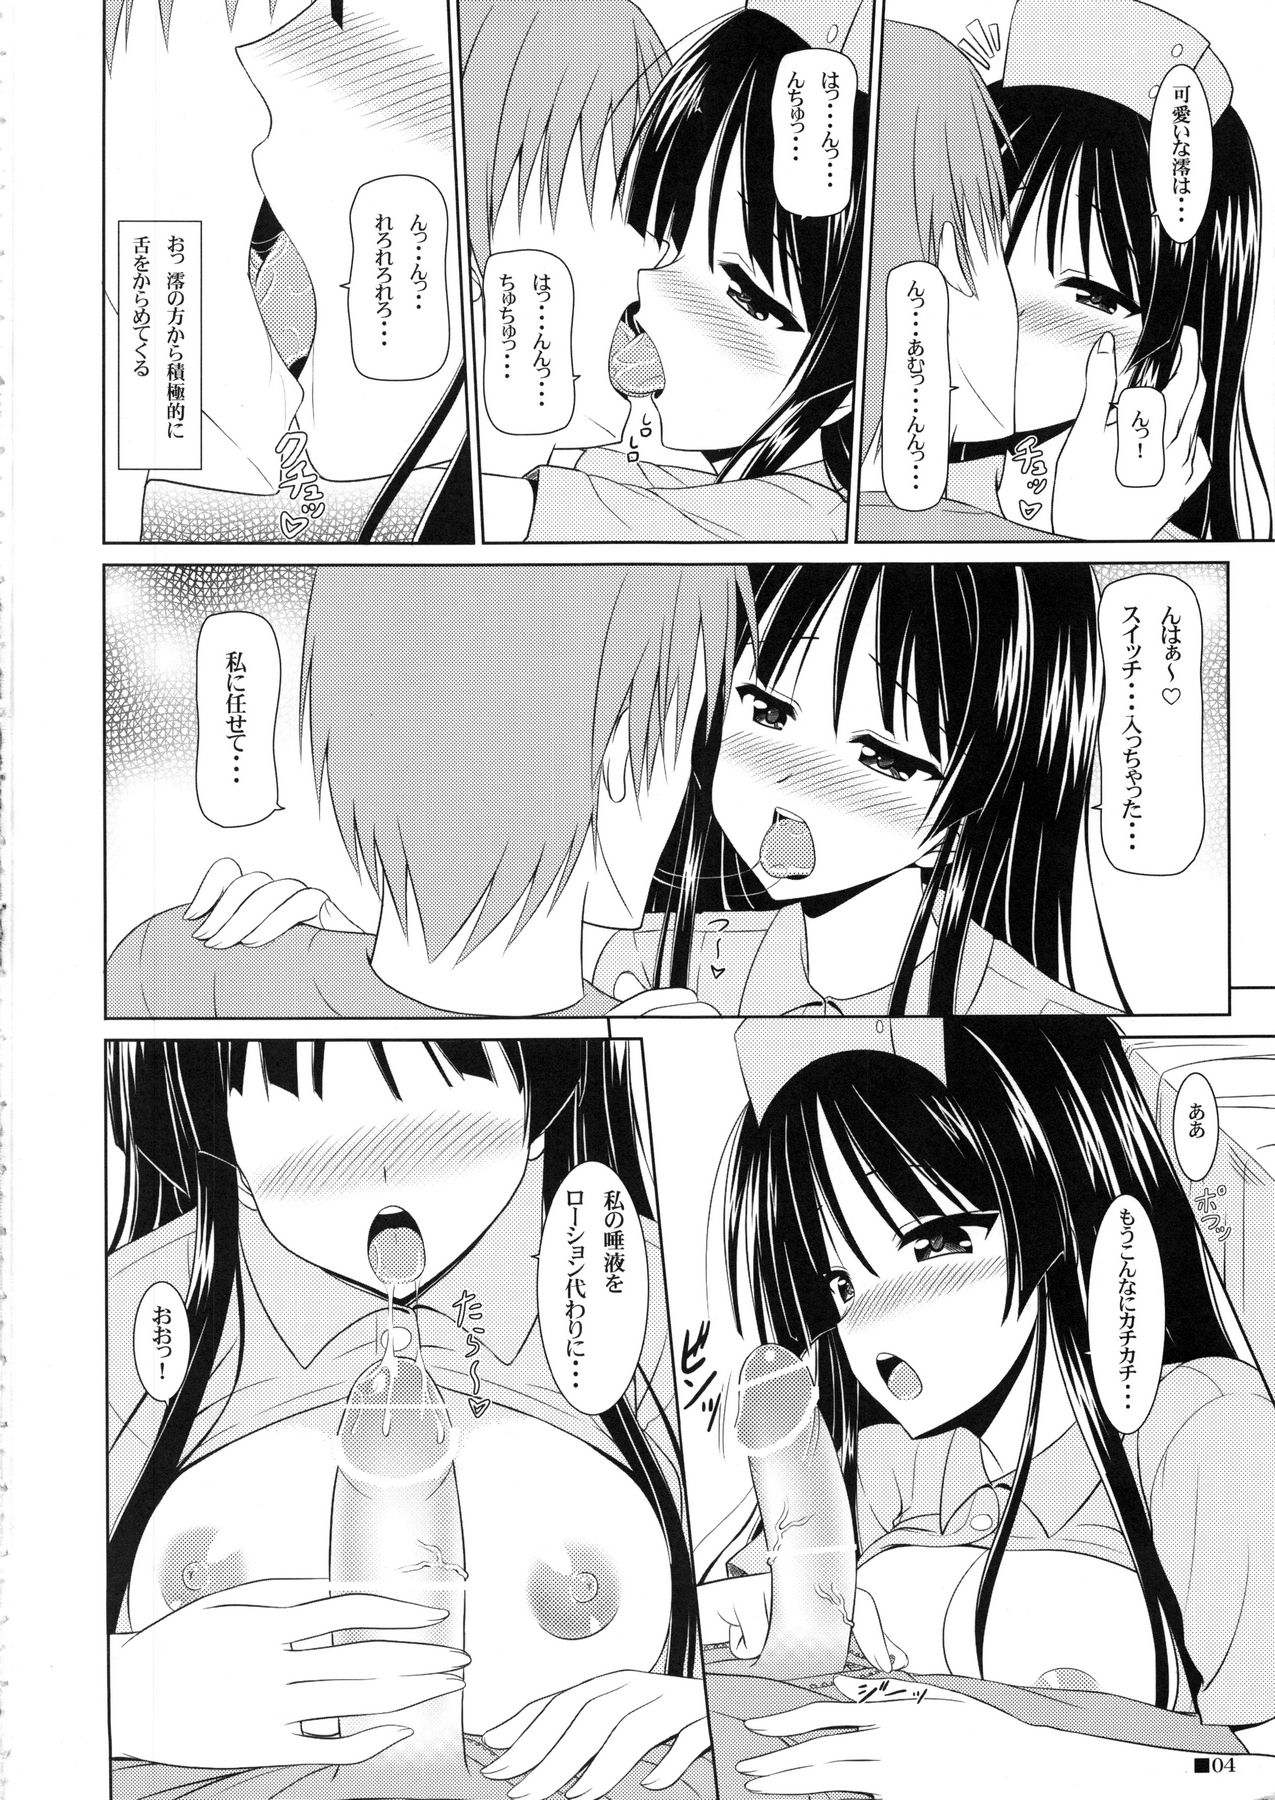 (C80) [Turning Point (Uehiro)] Mio-chan Switch! (K-ON!) page 3 full